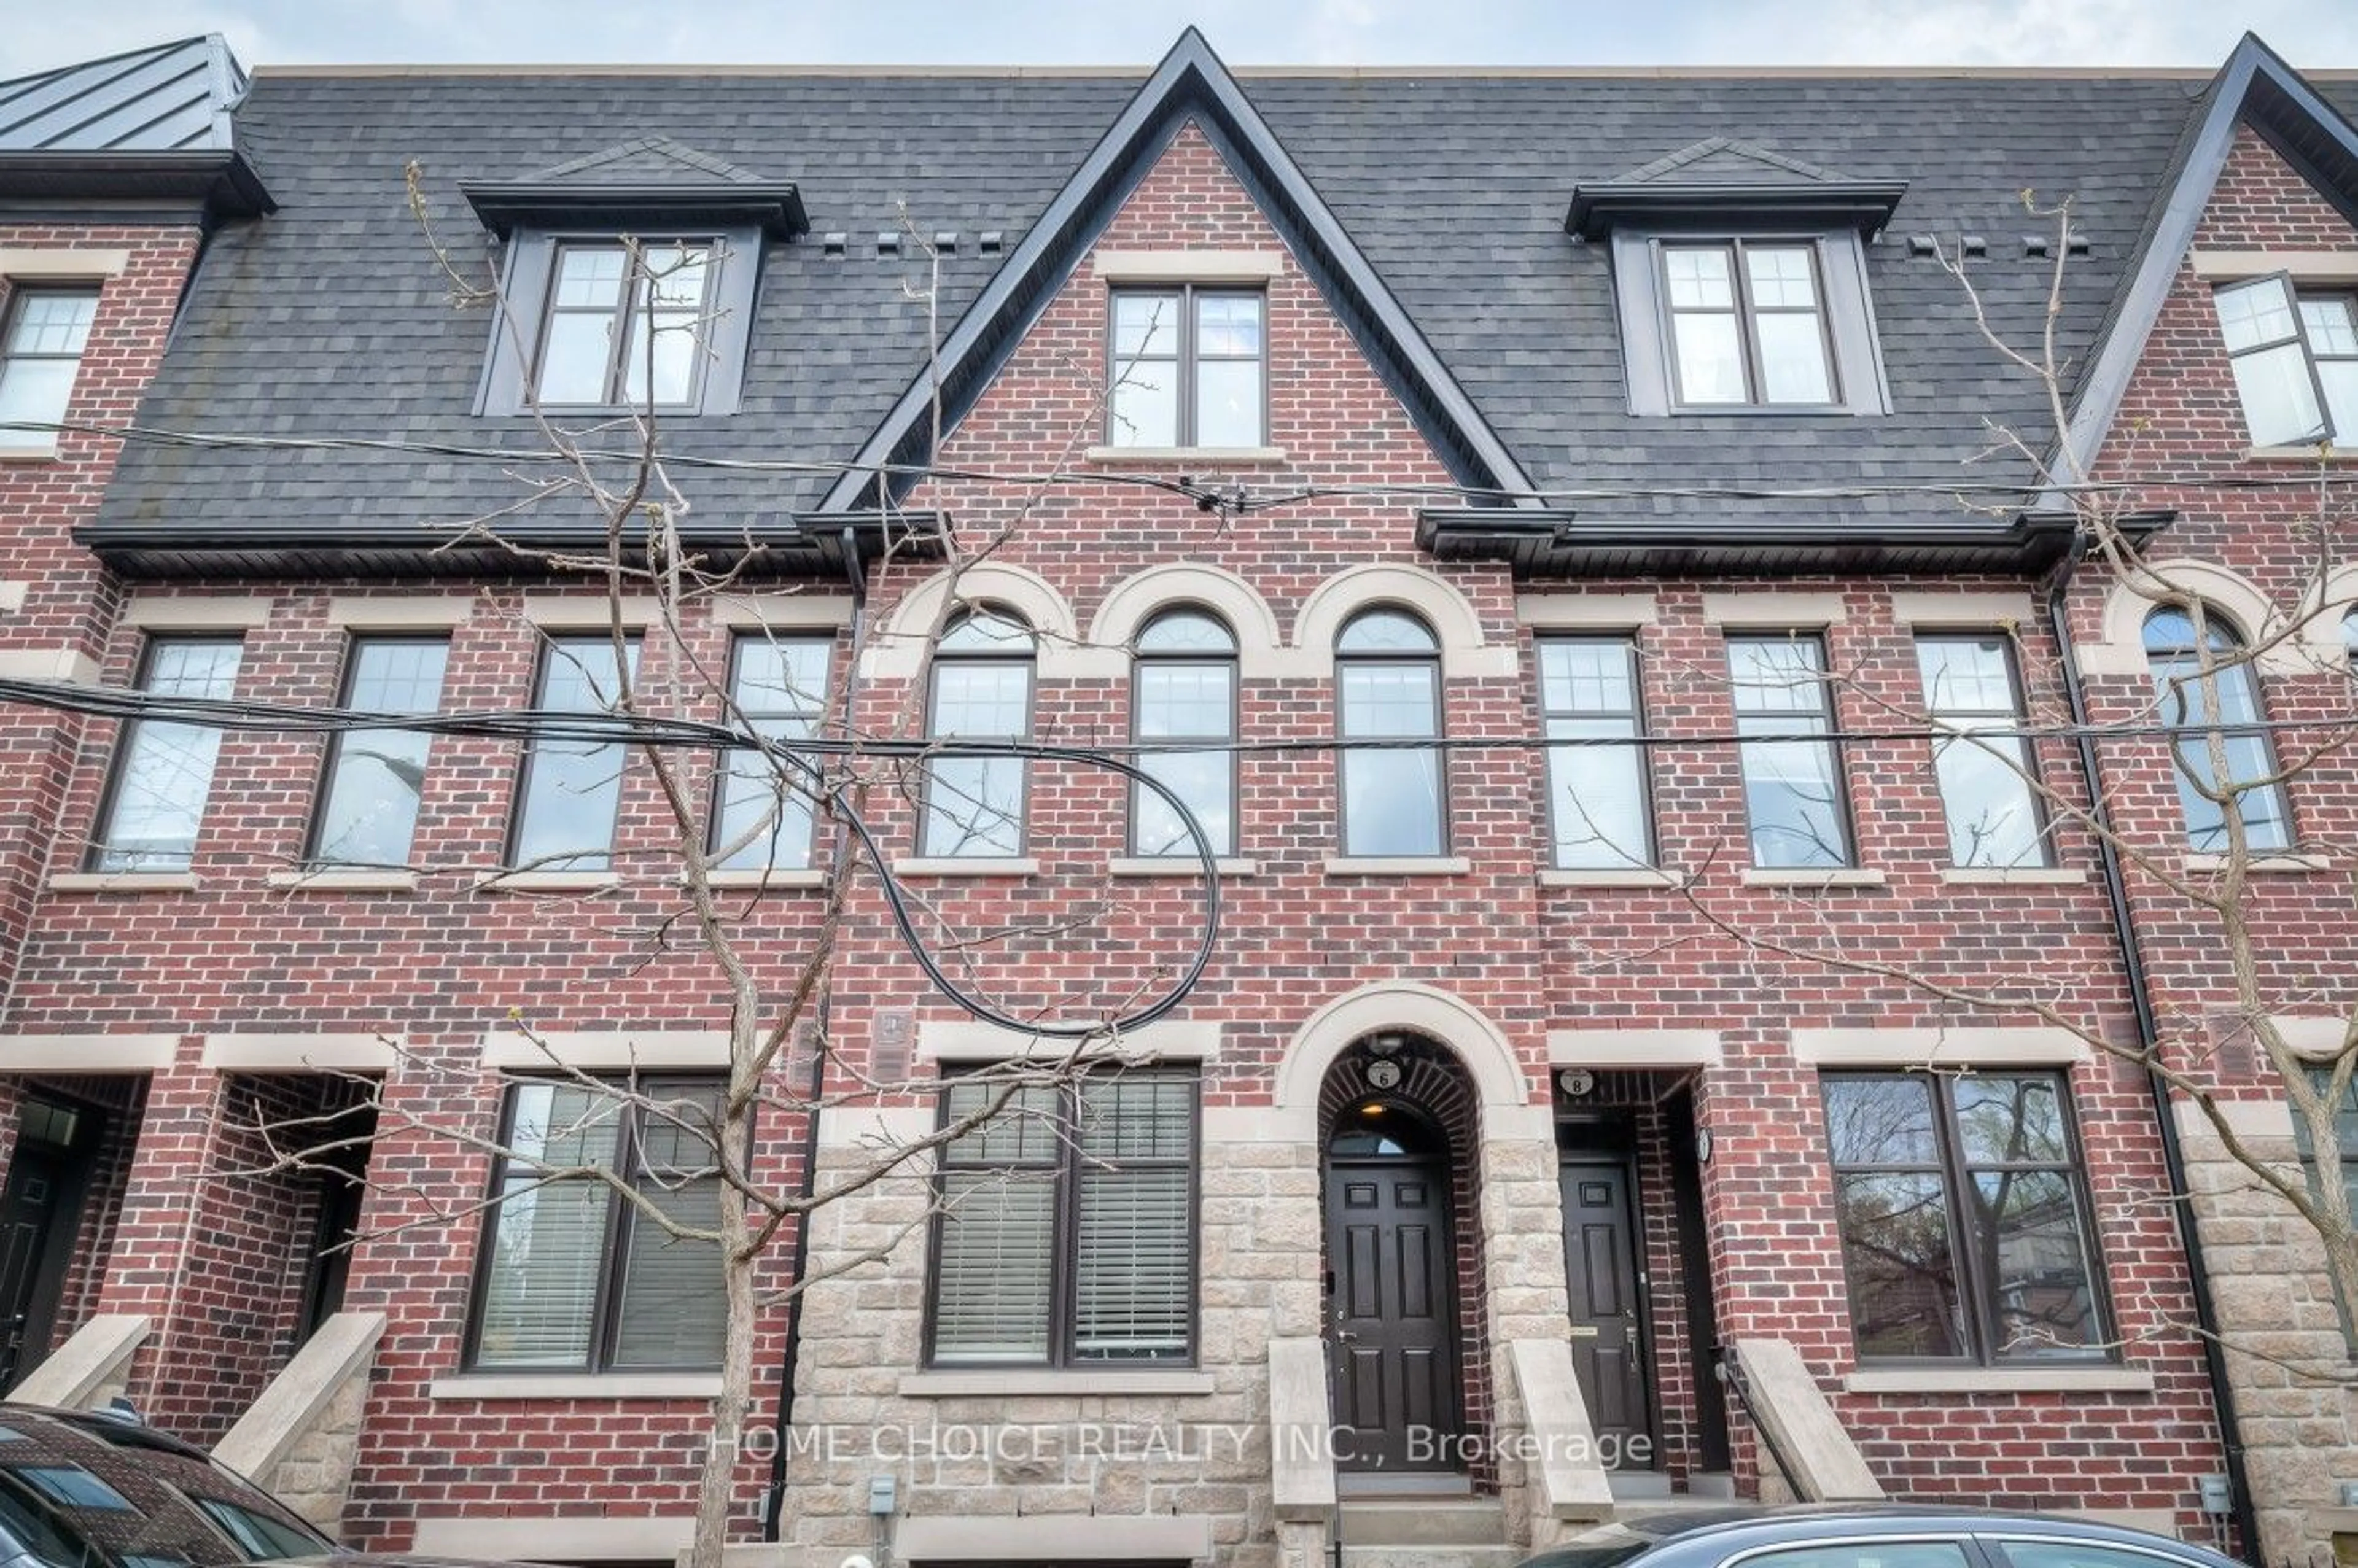 Home with brick exterior material for 150 Broadview Ave #6, Toronto Ontario M4M 2G2